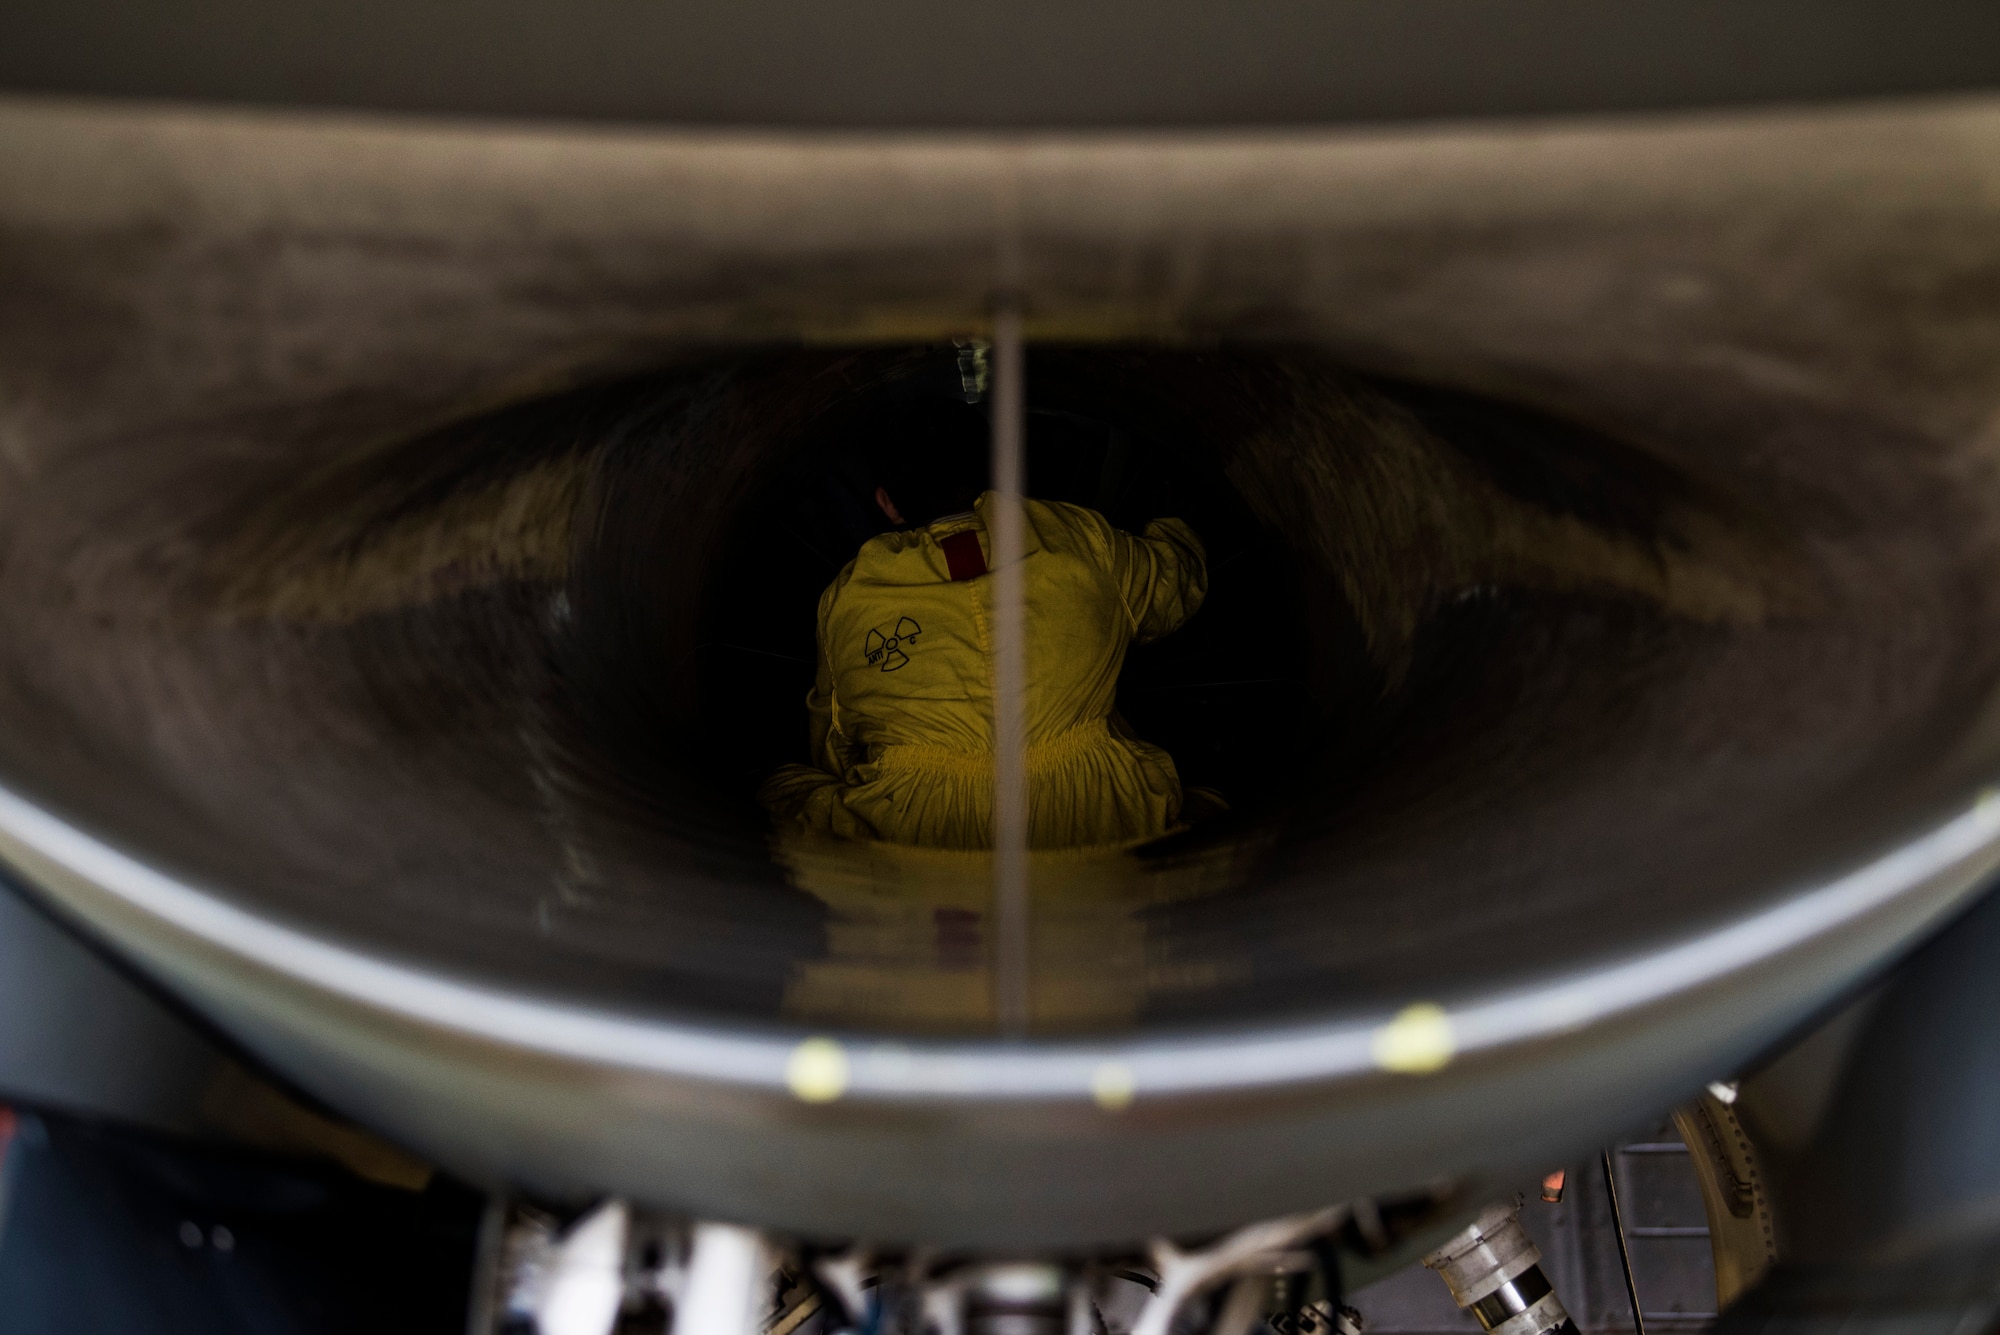 U.S. Air Force Staff Sgt. Martin Perez, 52nd Aircraft Maintenance Squadron tactical aircraft maintainer, inspects an F-16 Fighting Falcon intake at Spangdahlem Air Base, Germany, Sept. 13, 2018. Perez wore a unique suit with no pockets or zippers to eliminate scratching the aircraft. Inspectors carry only a flashlight and a mirror to ensure nothing is left in the intake. (U.S. Air Force photo by Airman 1st Class Valerie Seelye)